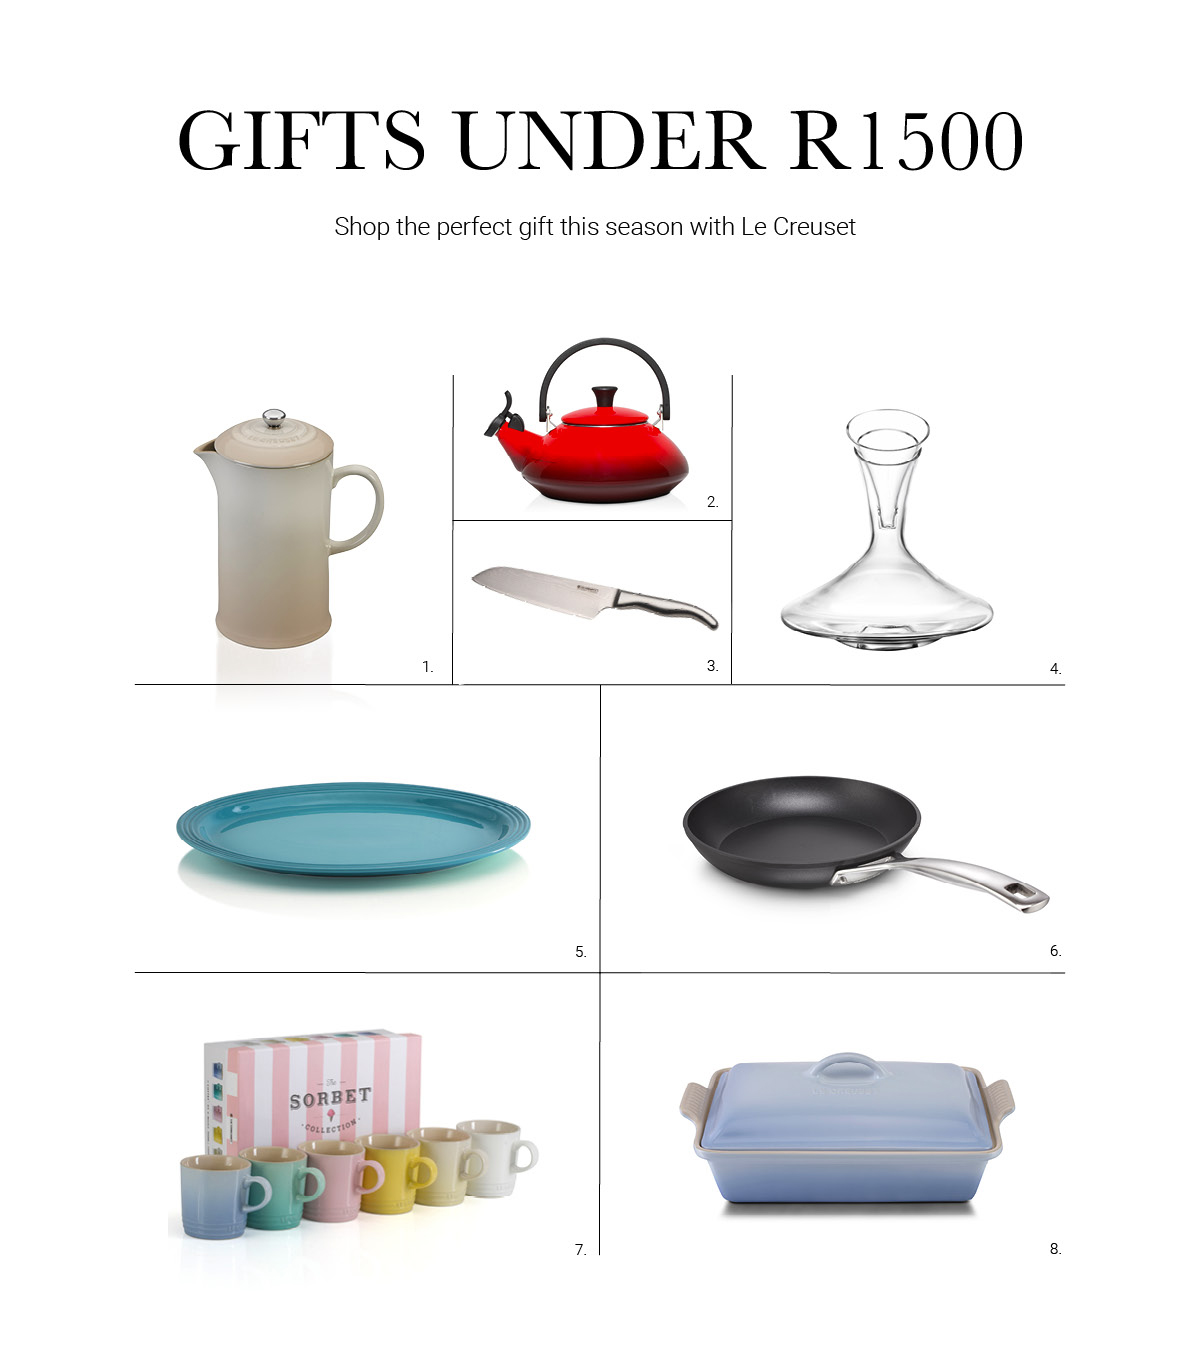 Le Creuset | Le Creuset Gift Guide: Gifts Under R1500